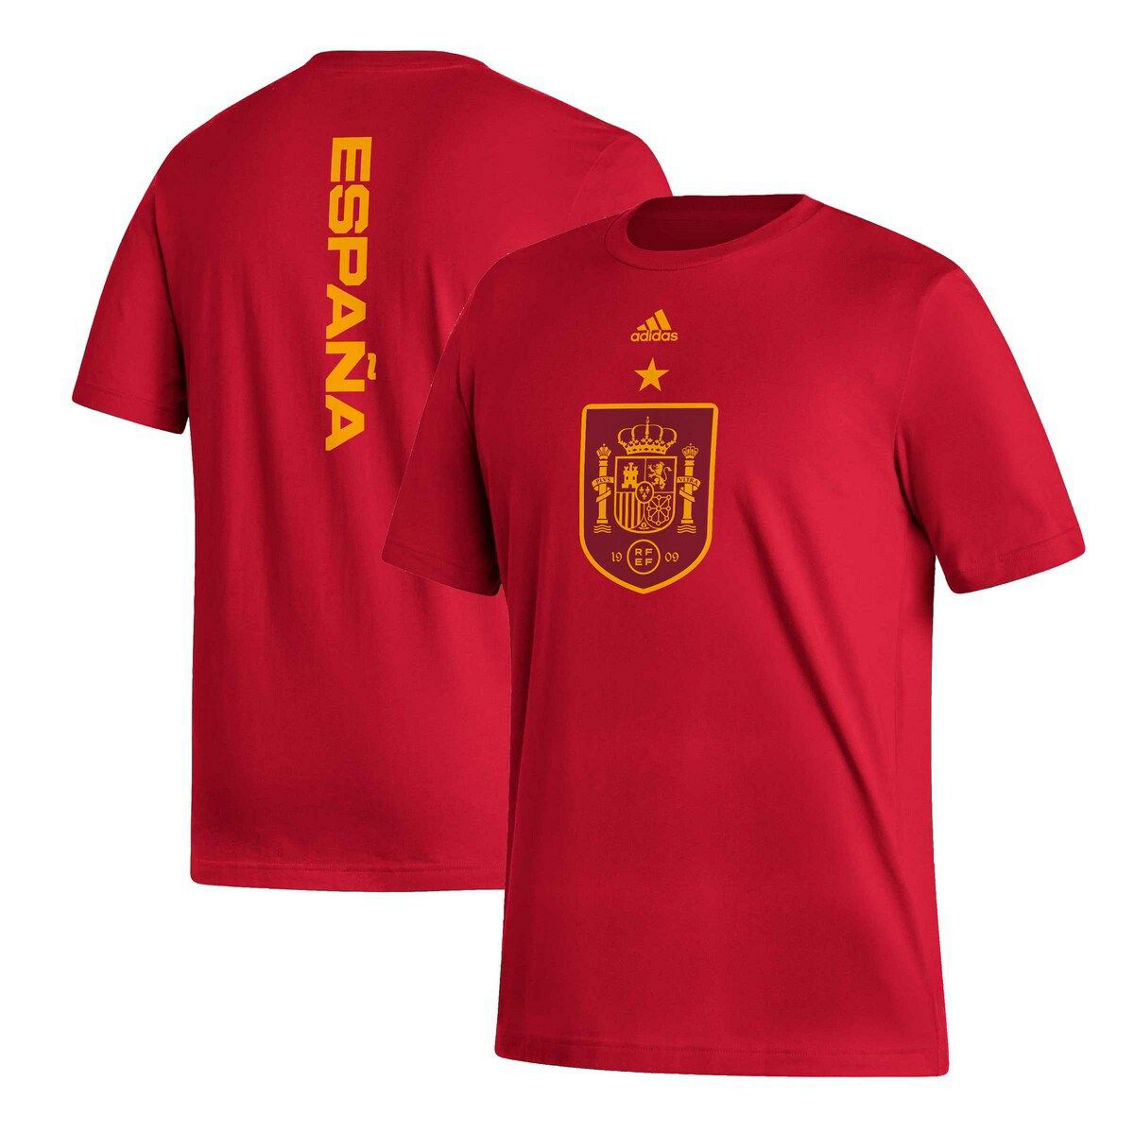 adidas Men's Red Spain National Team Vertical Back T-Shirt - Image 2 of 4